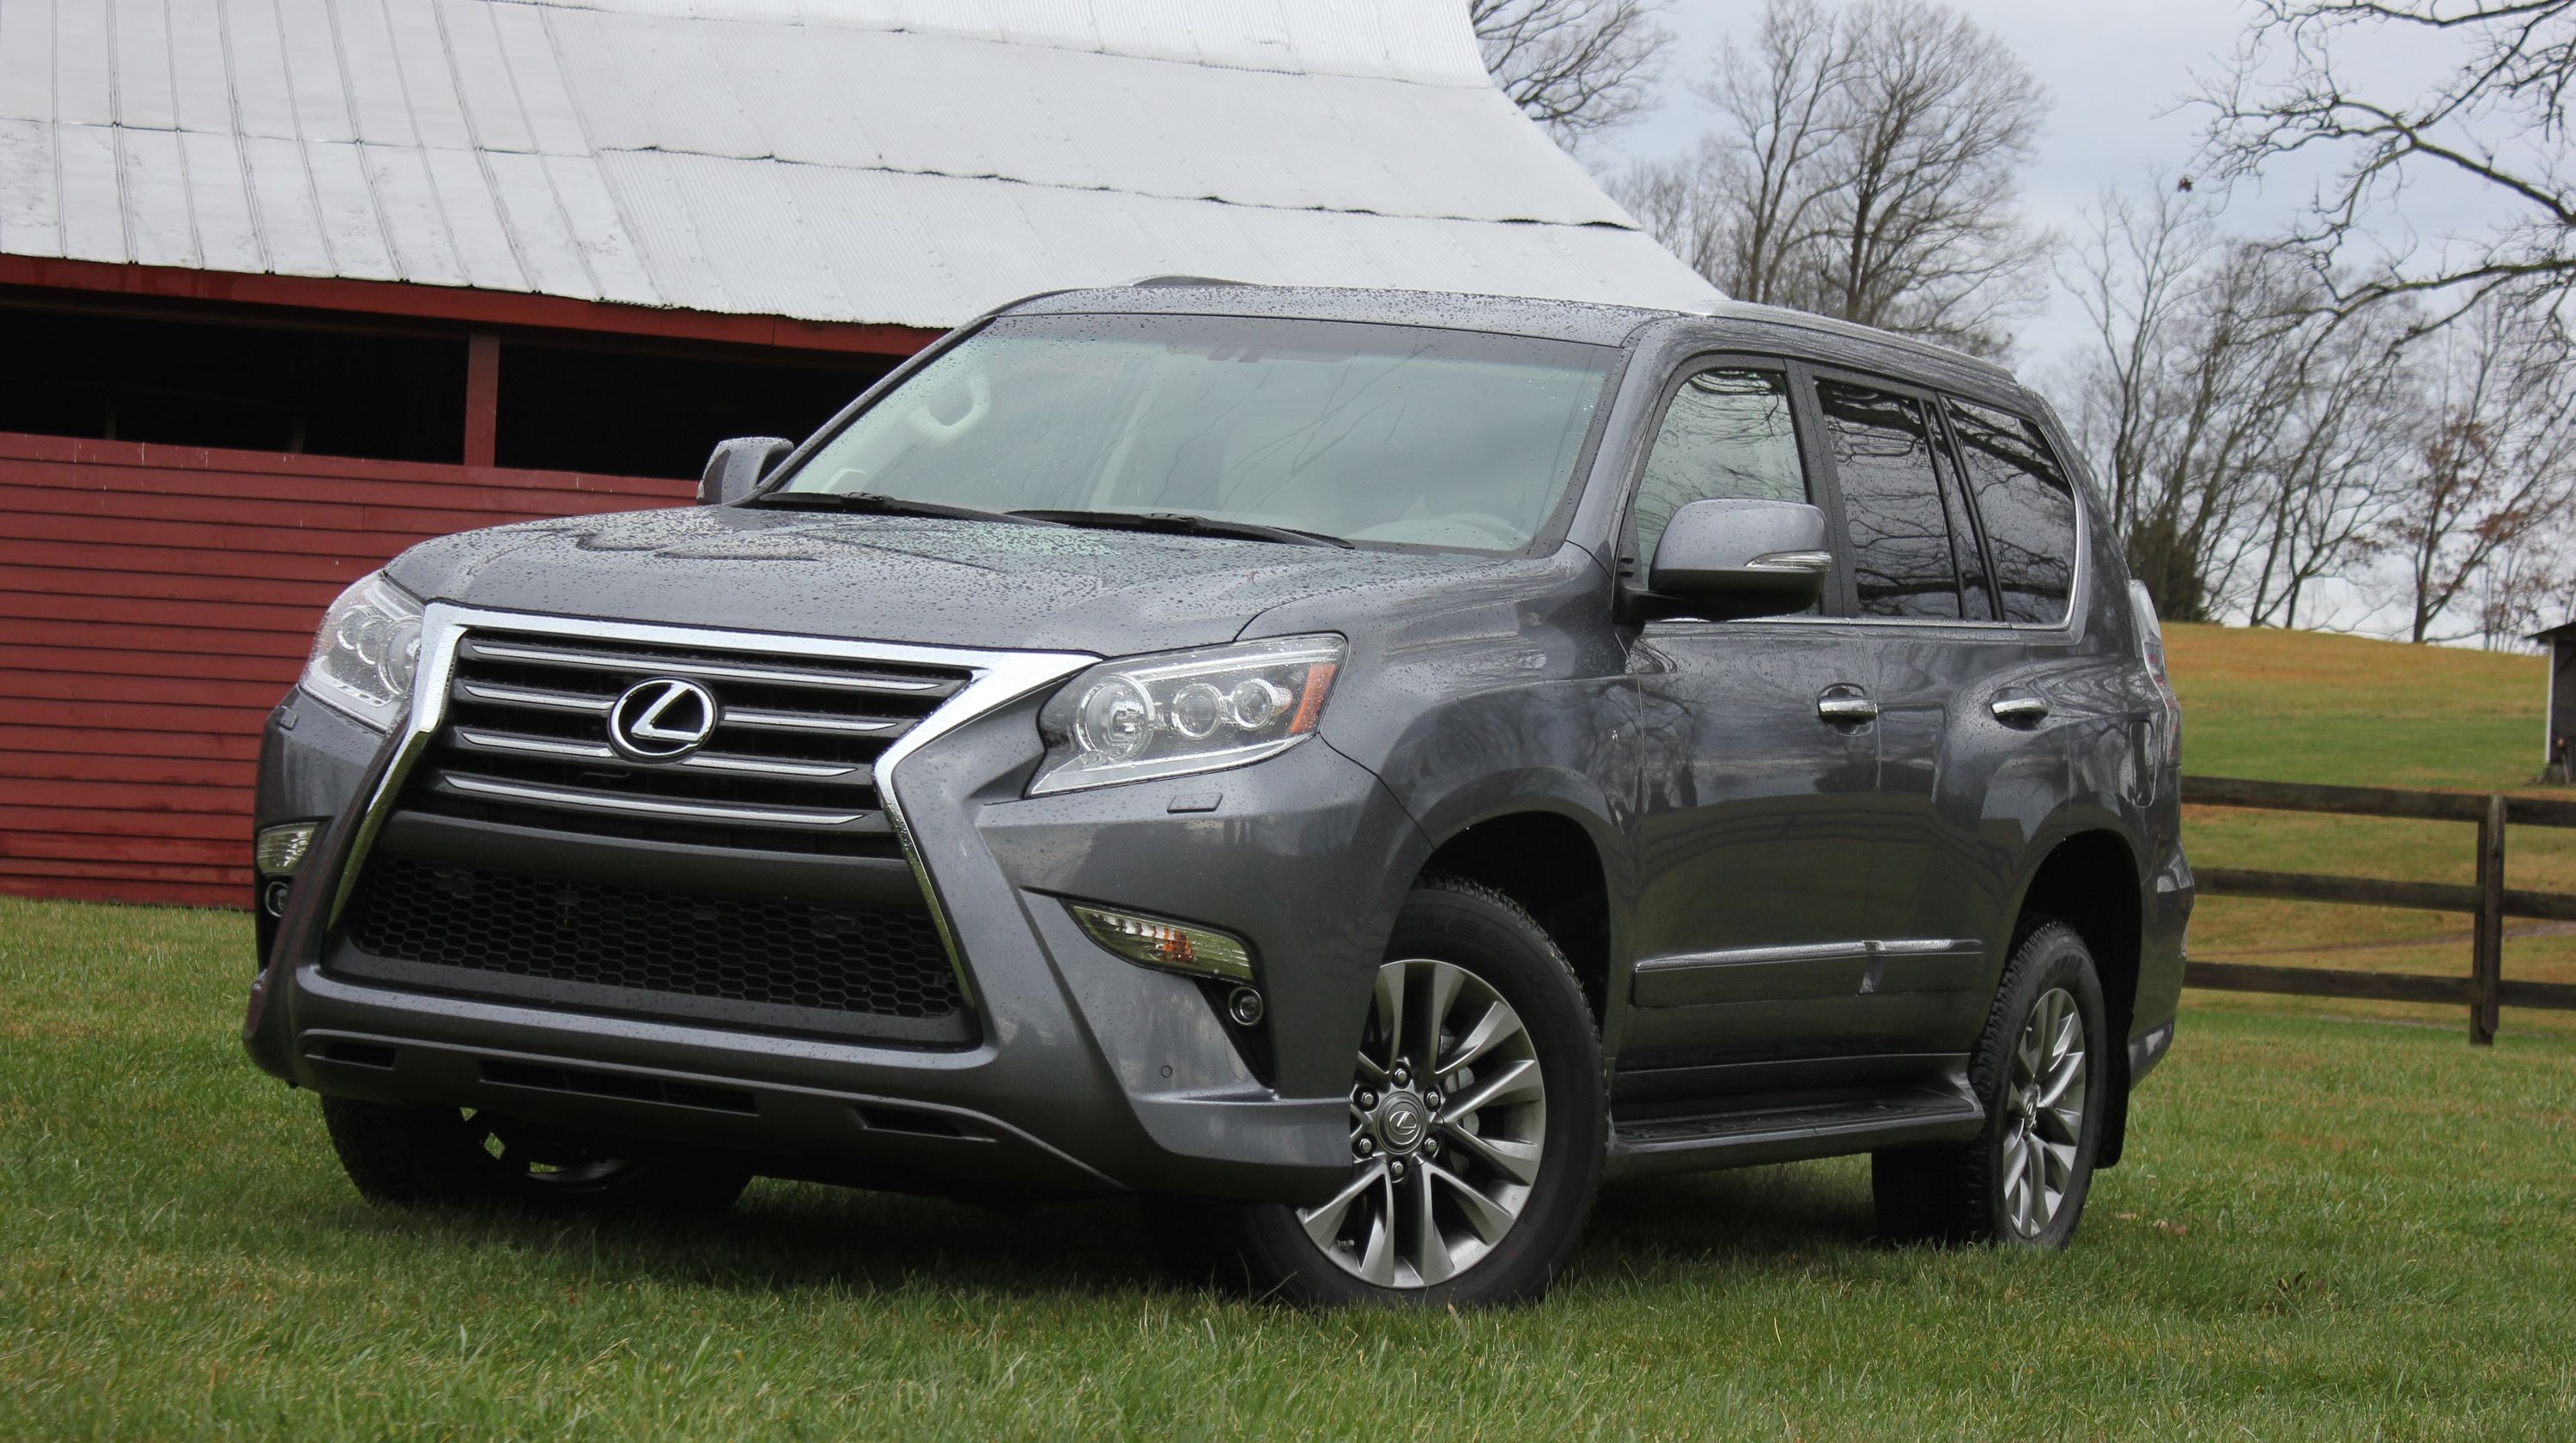  Christian Moe spent a week with a dying breed: a luxury, body-on-frame SUV. Check out what he thought of the GX 460 at TopSpeed.com.